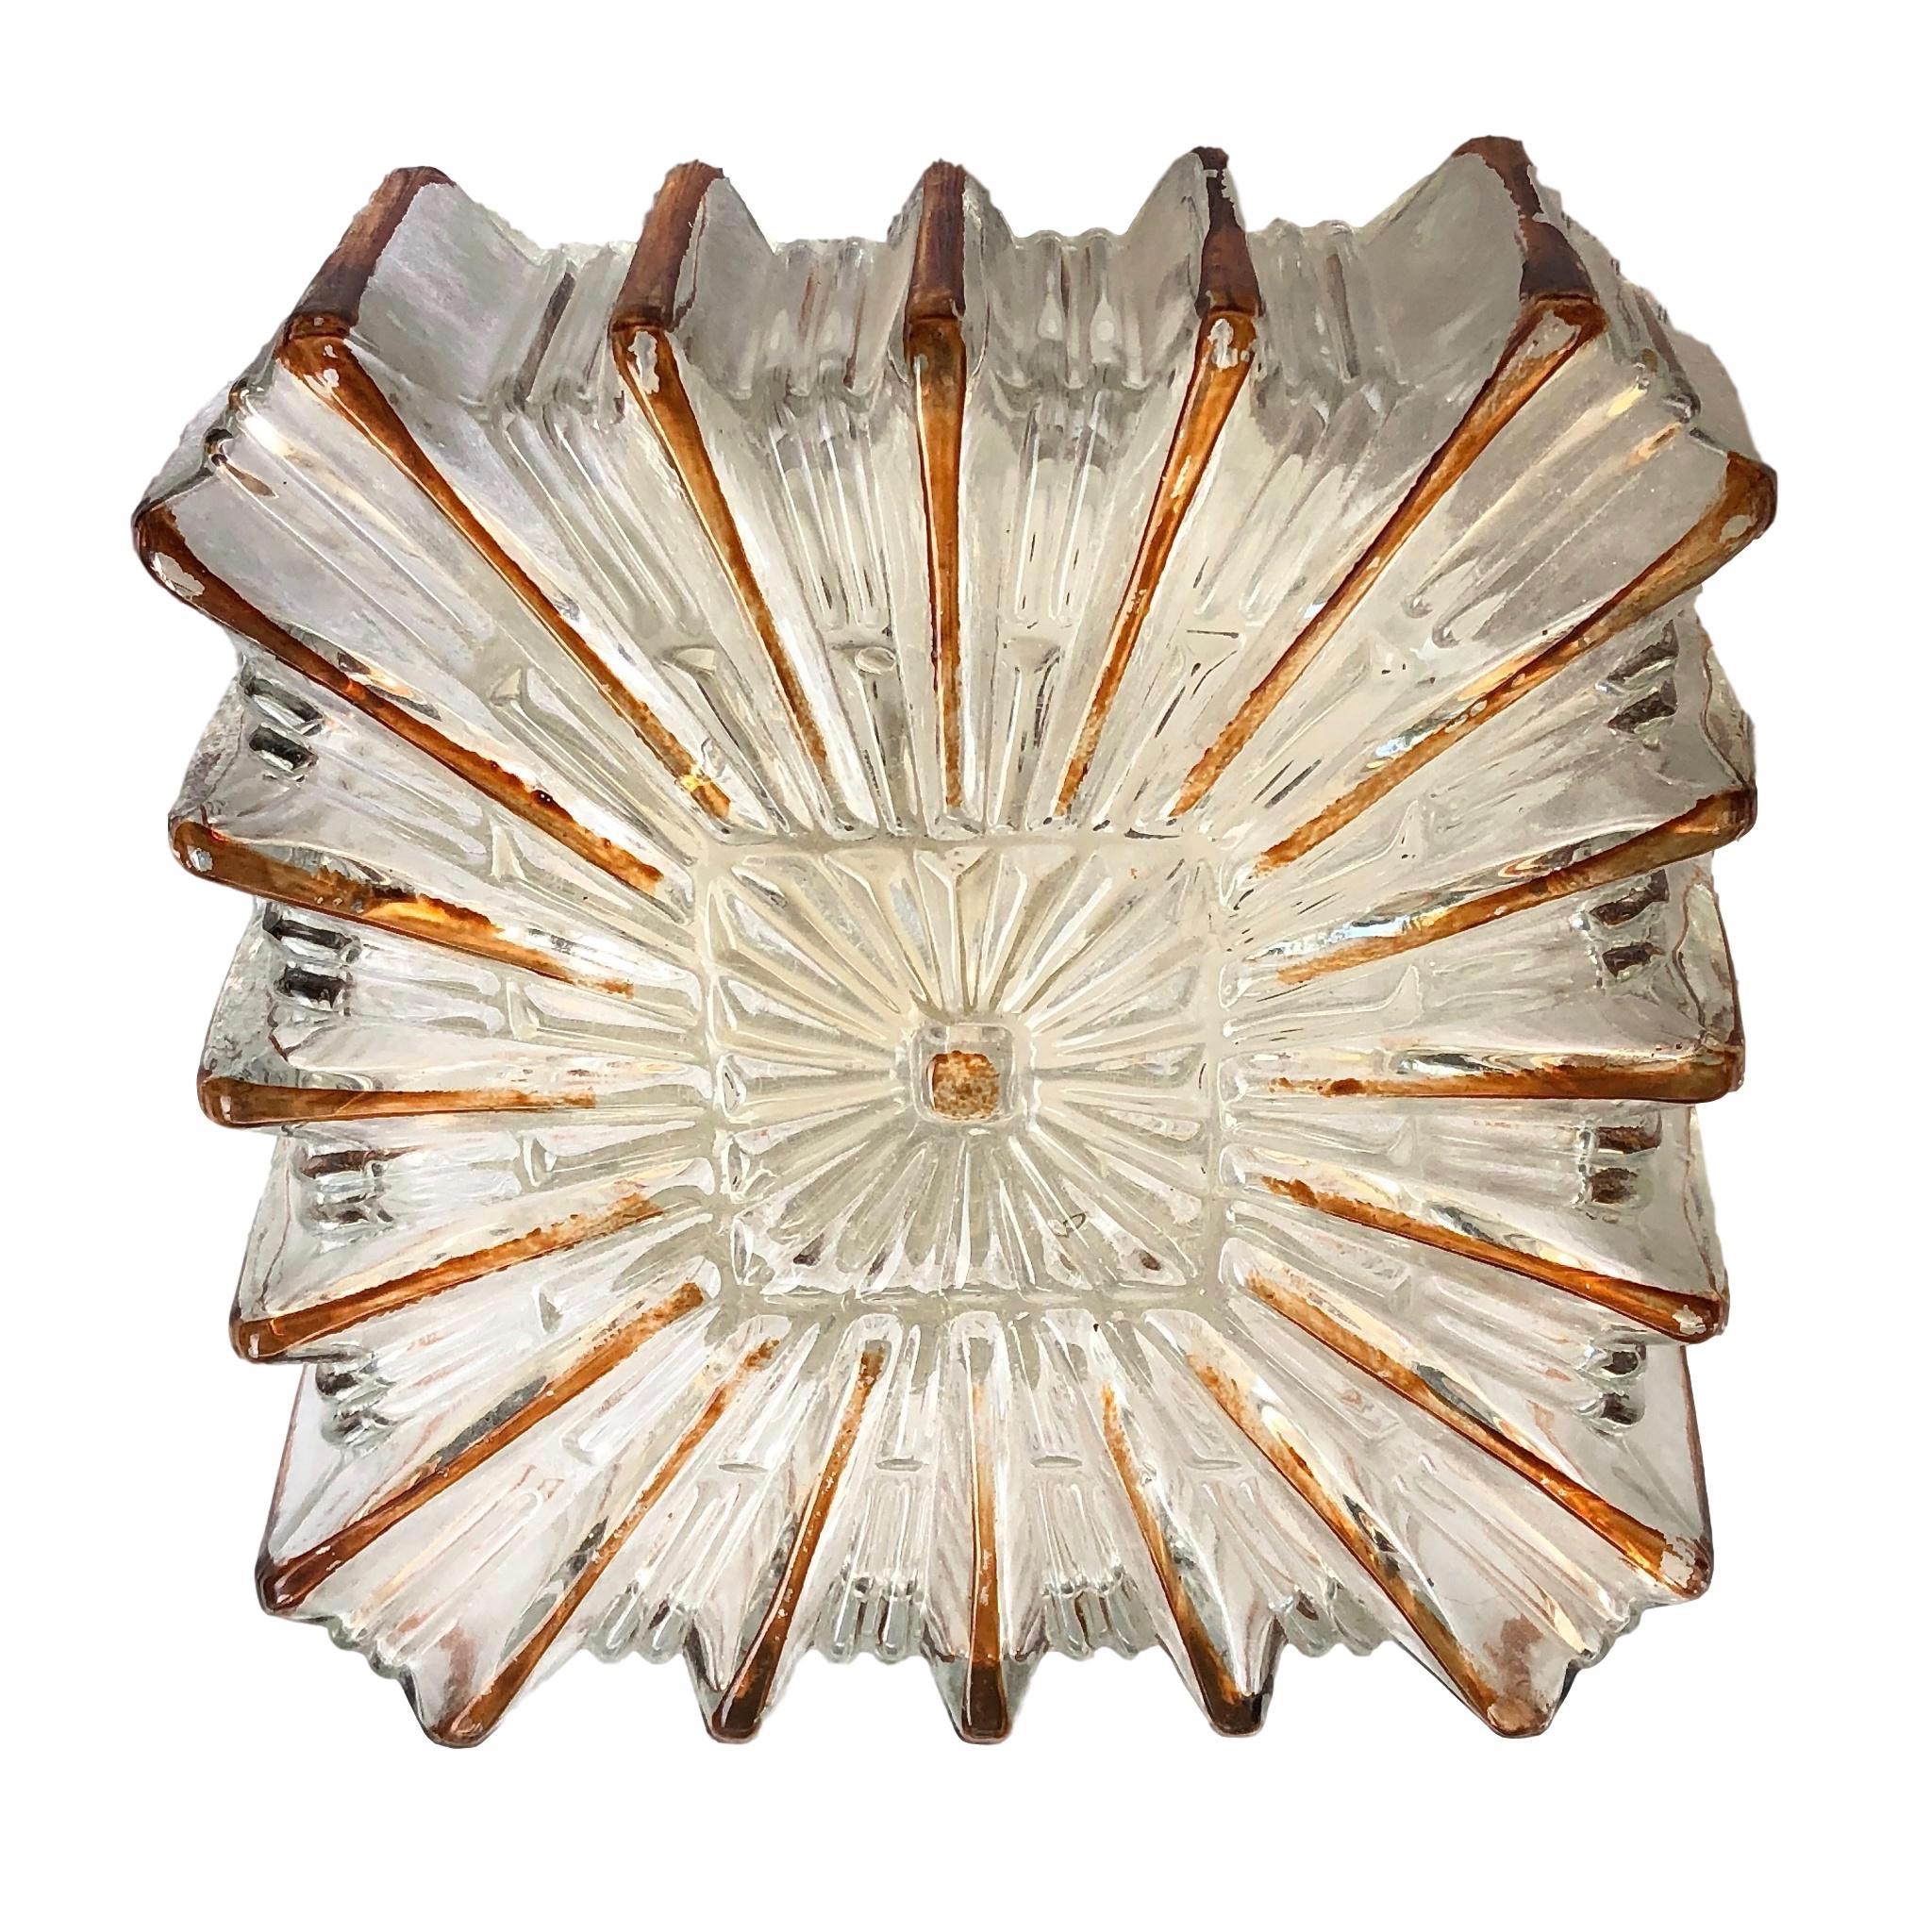 Petite starburst pattern flush mount. Made in Germany by Glashuette Limburg. Gorgeous textured glass flush mount with metal fixture. The Fixture requires one European E27 / 110 Volt Edison bulb, up to 60 watts.